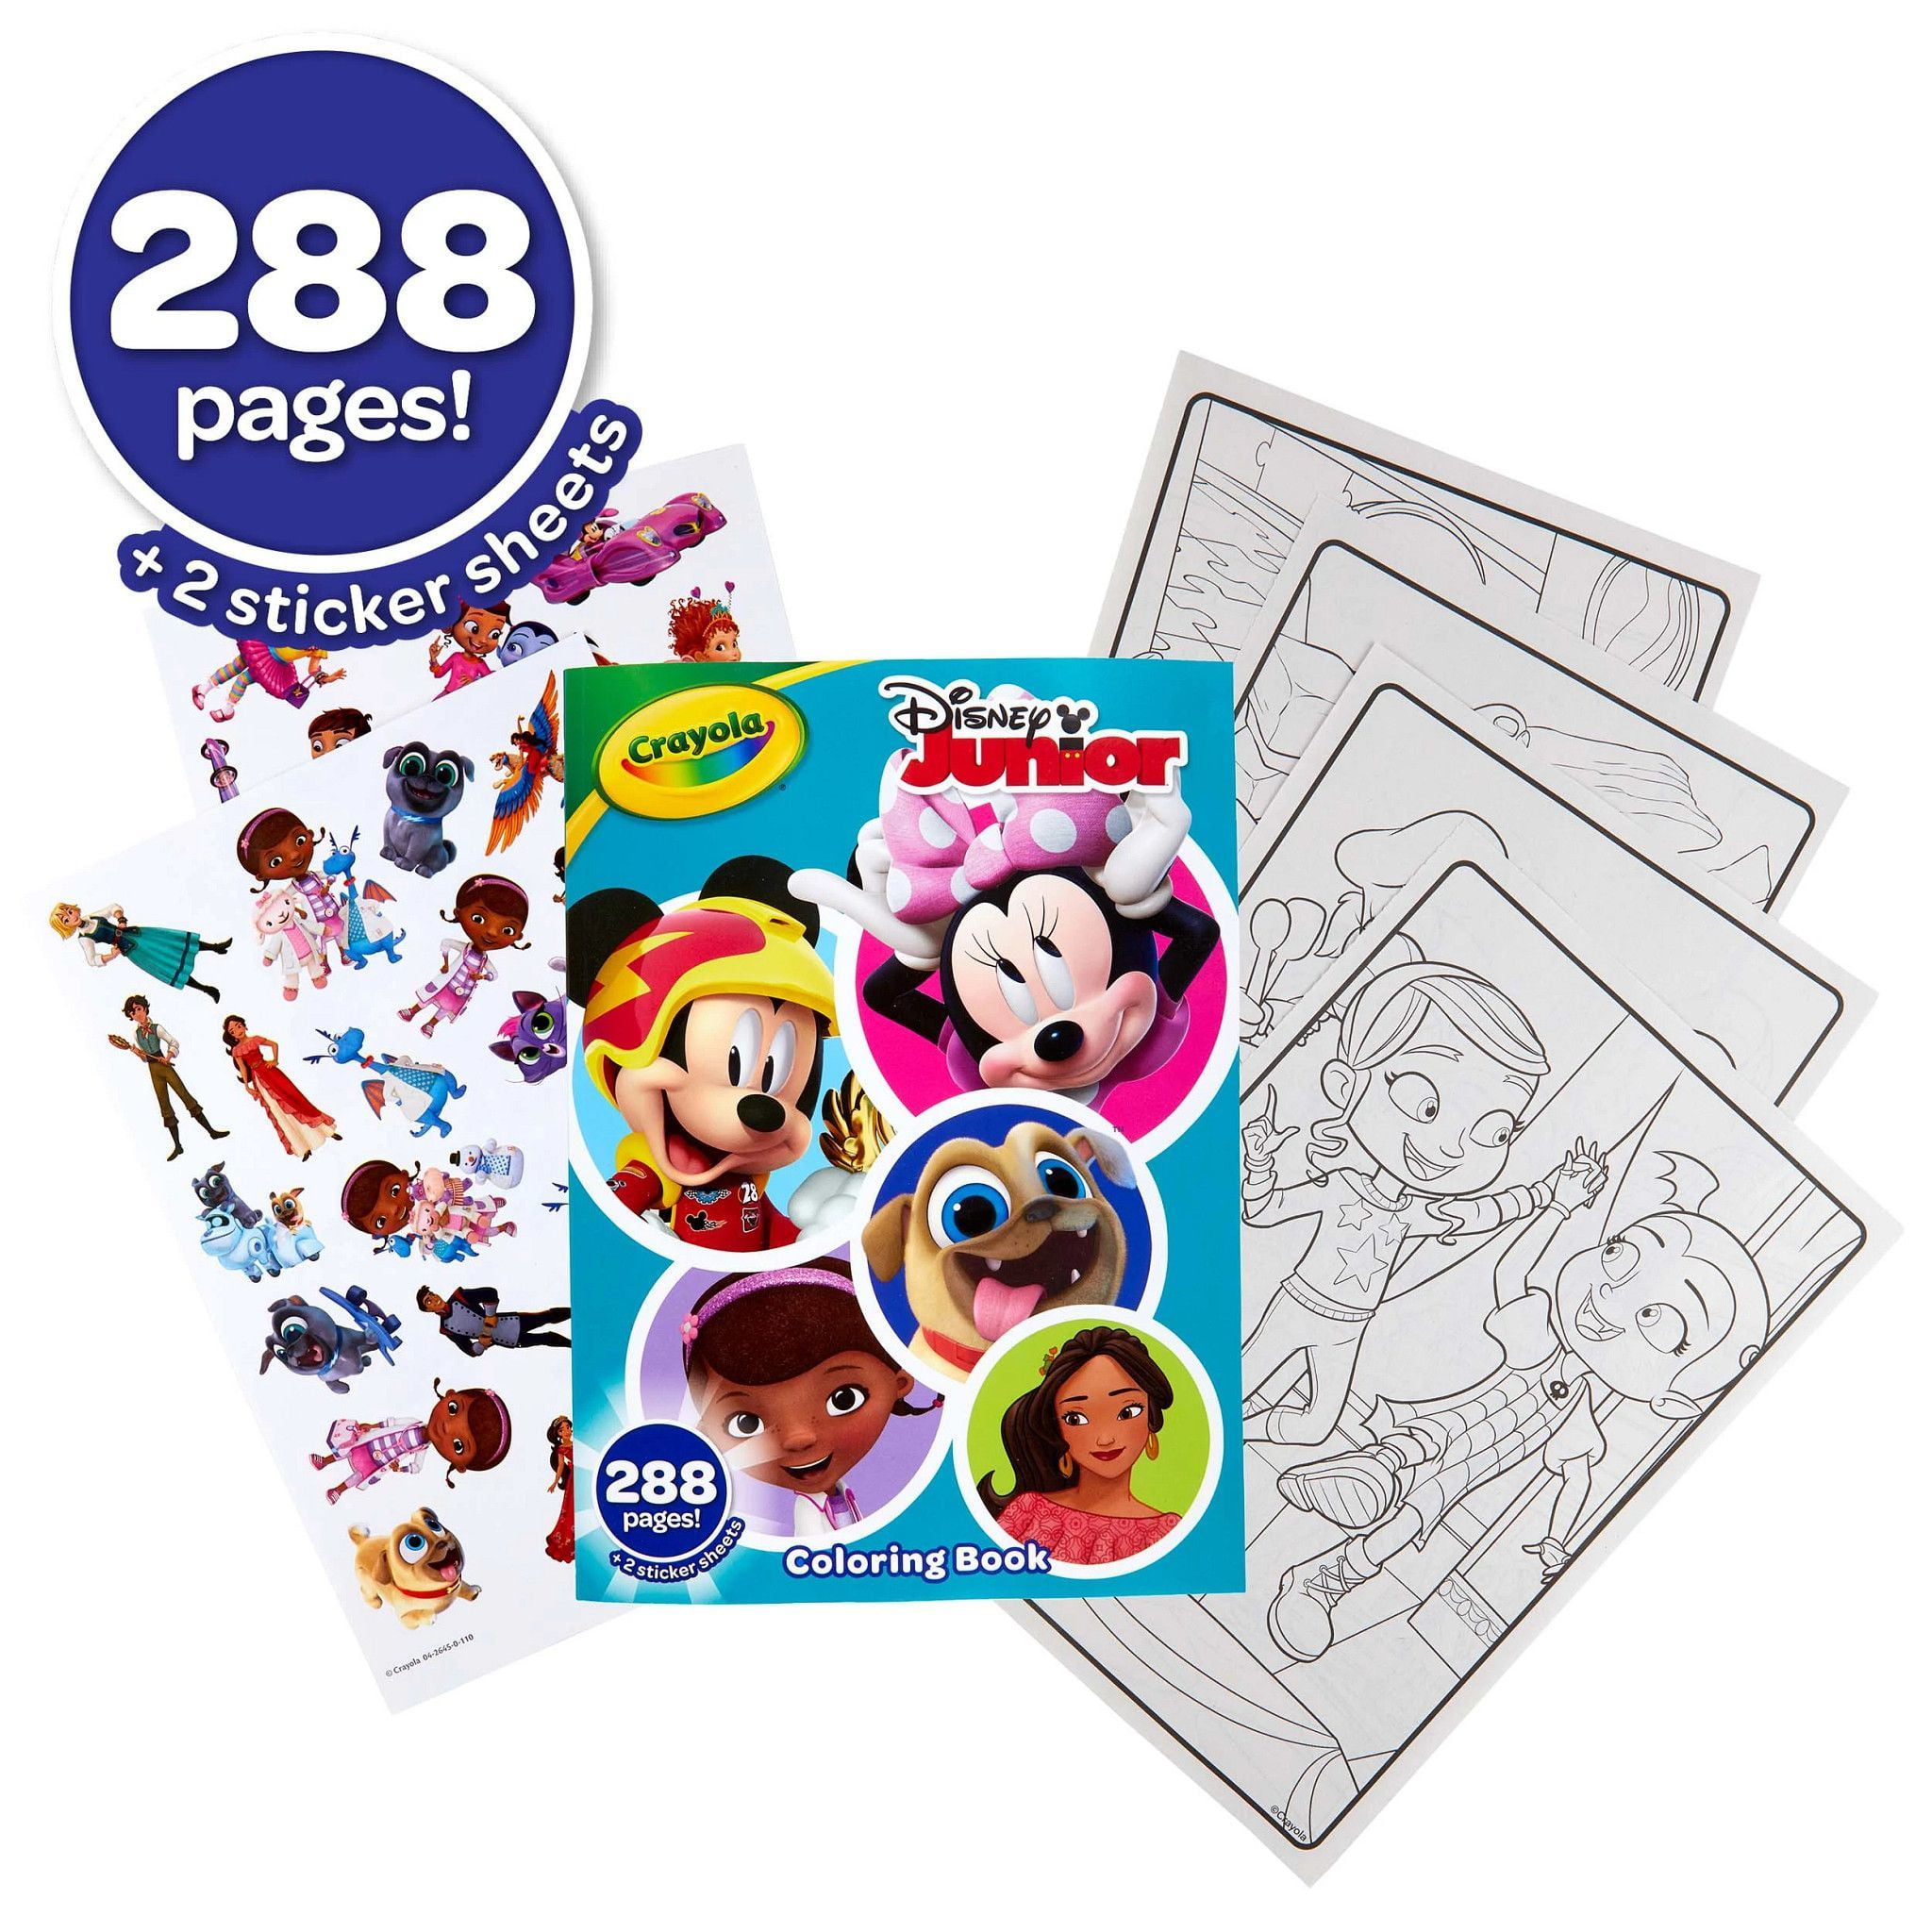 Crayola Disney Coloring Book with Stickers, Disney Junior, Gift for Kids, 288 Pages, Ages 3, 4, 5, 6